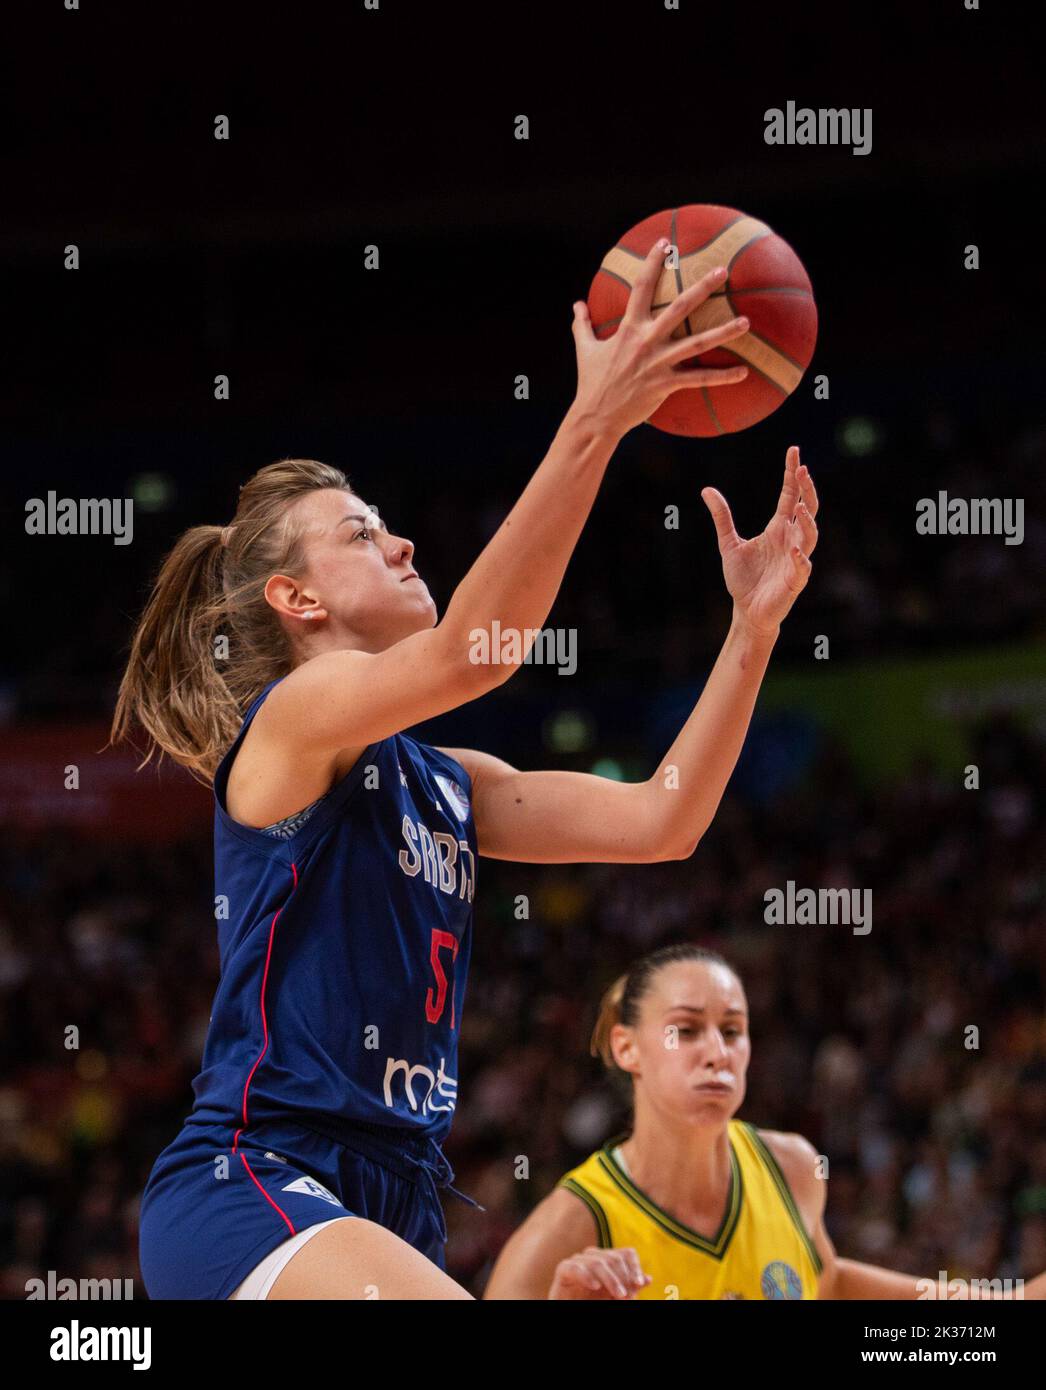 Sydney, Australia. 25th Sep, 2022. Mina Djordjevic (L) of Serbia goes up for a basket during a Group B match against Australia at the FIBA Women's Basketball World Cup 2022 in Sydney, Australia, Sept. 25, 2022. Credit: Hu Jingchen/Xinhua/Alamy Live News Stock Photo